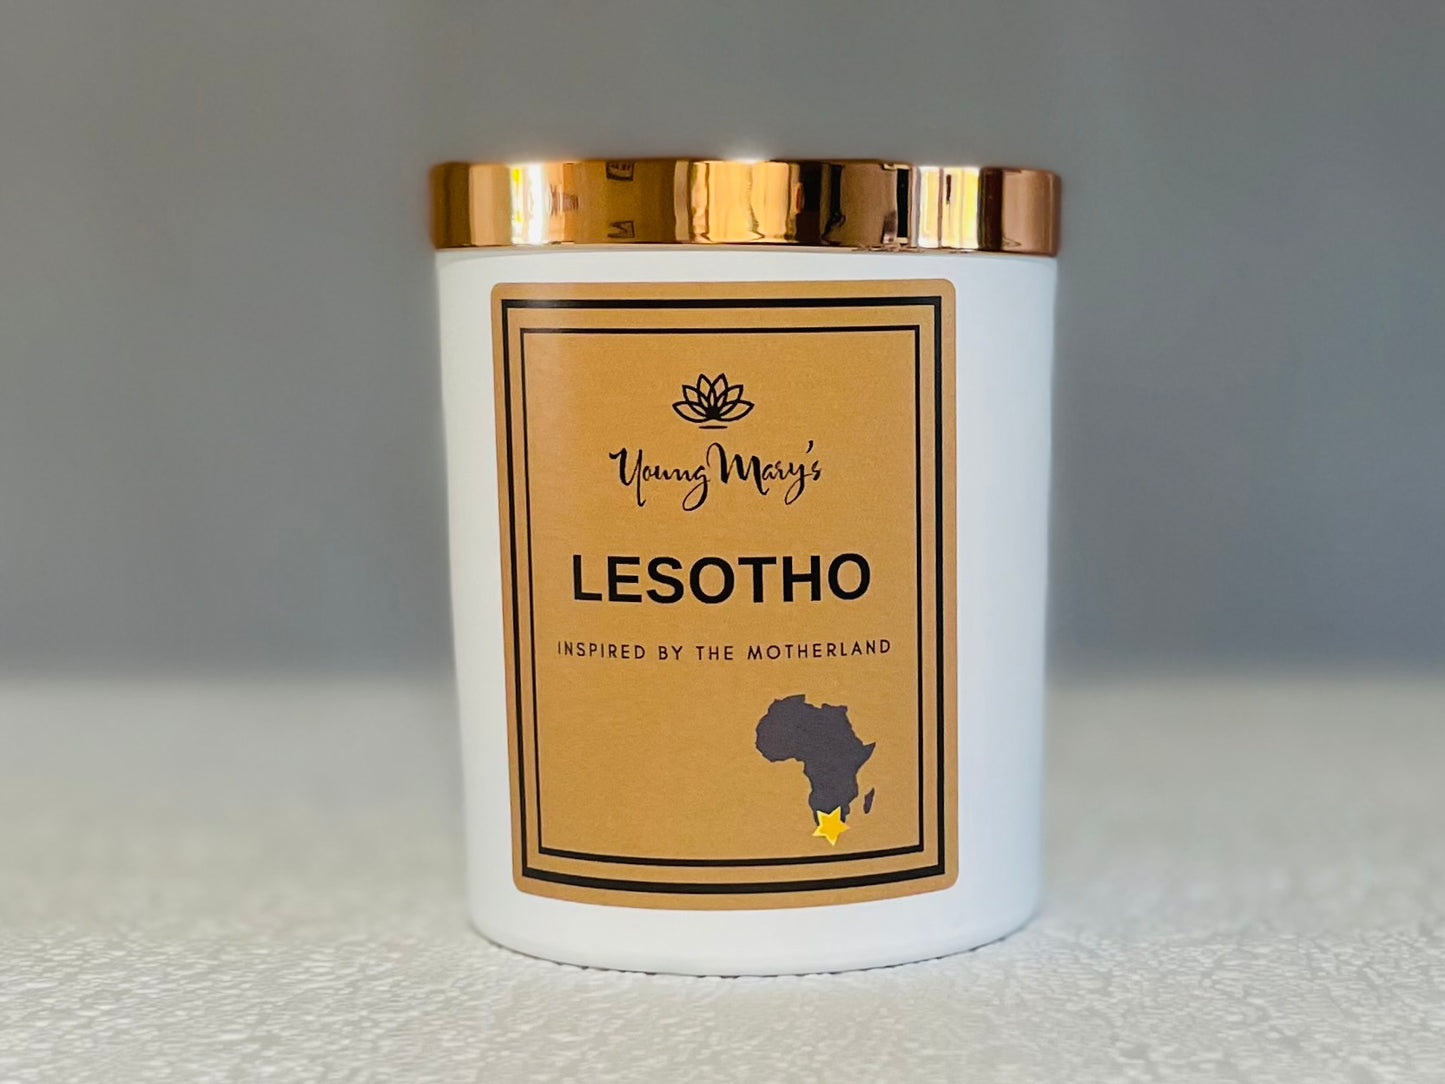 Lesotho - punchy and bright (Winter African Wonder)